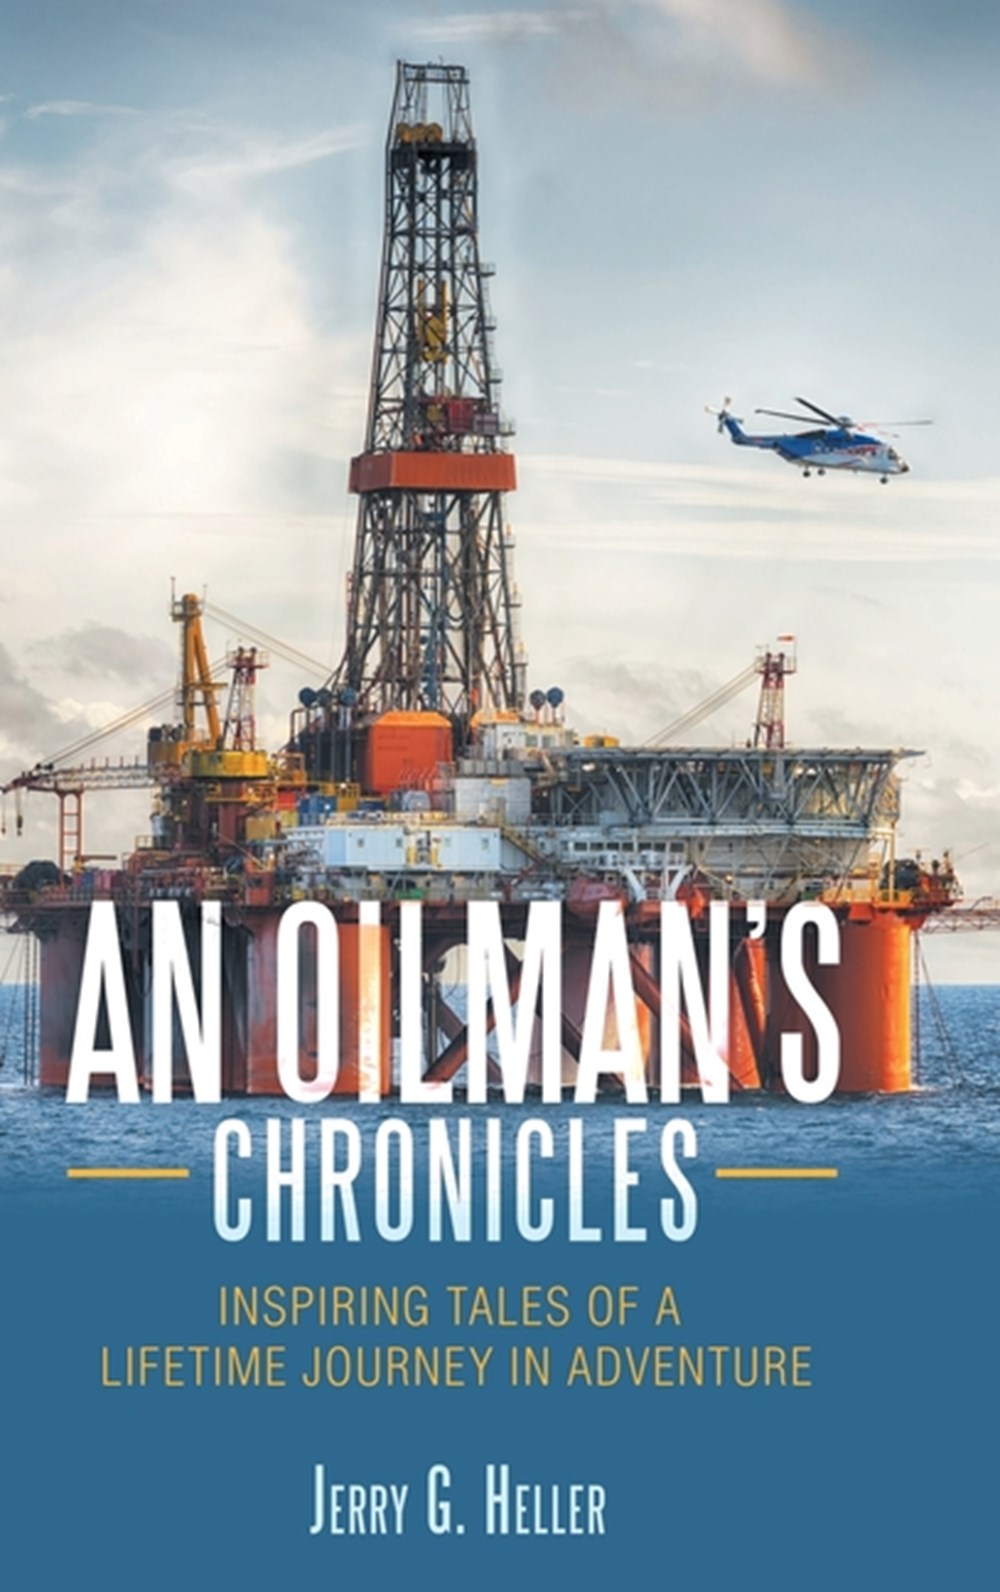 Oilman's Chronicles Inspiring Tales of a Lifetime Journey in Adventure